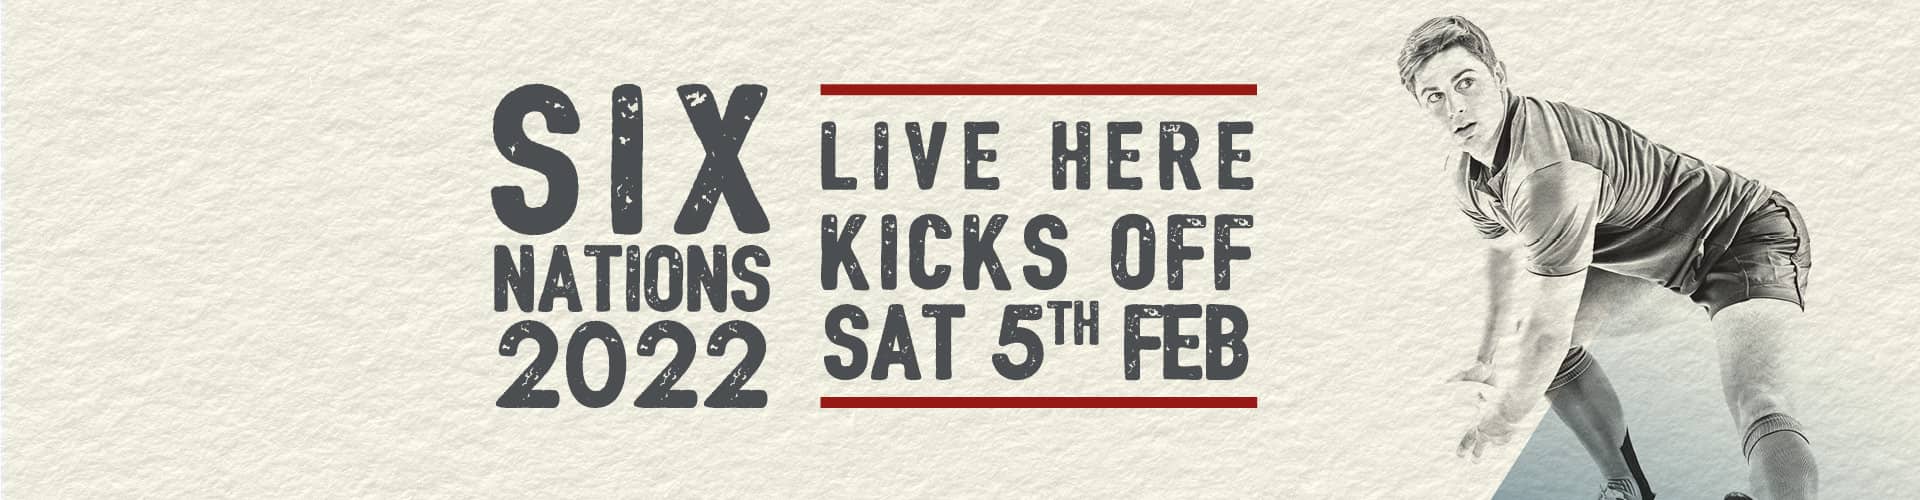 Watch the Six Nations live at The Royal George